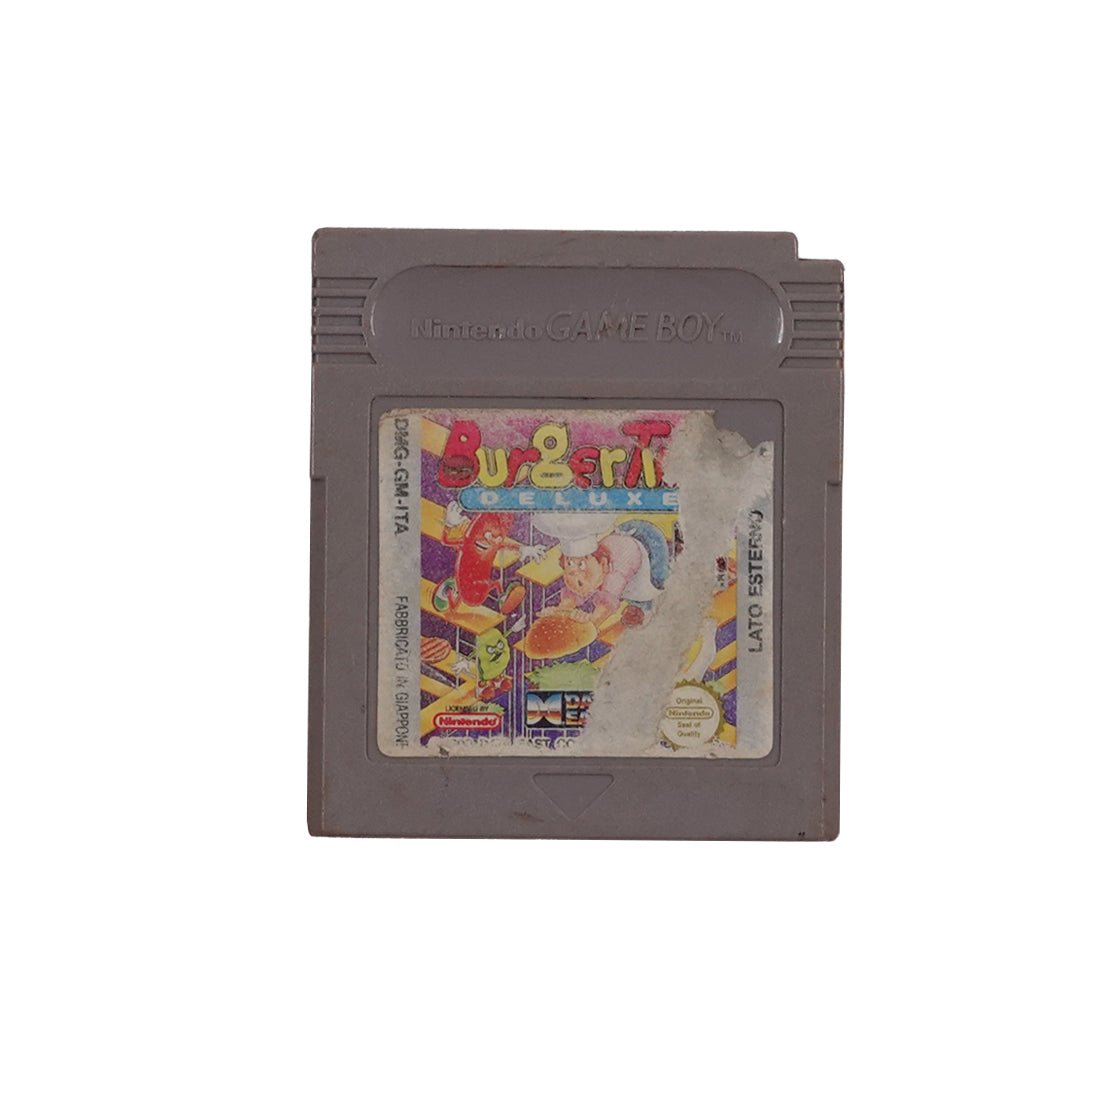 (Pre-Owned) Burger Time Deluxe - Gameboy Classic - Store 974 | ستور ٩٧٤